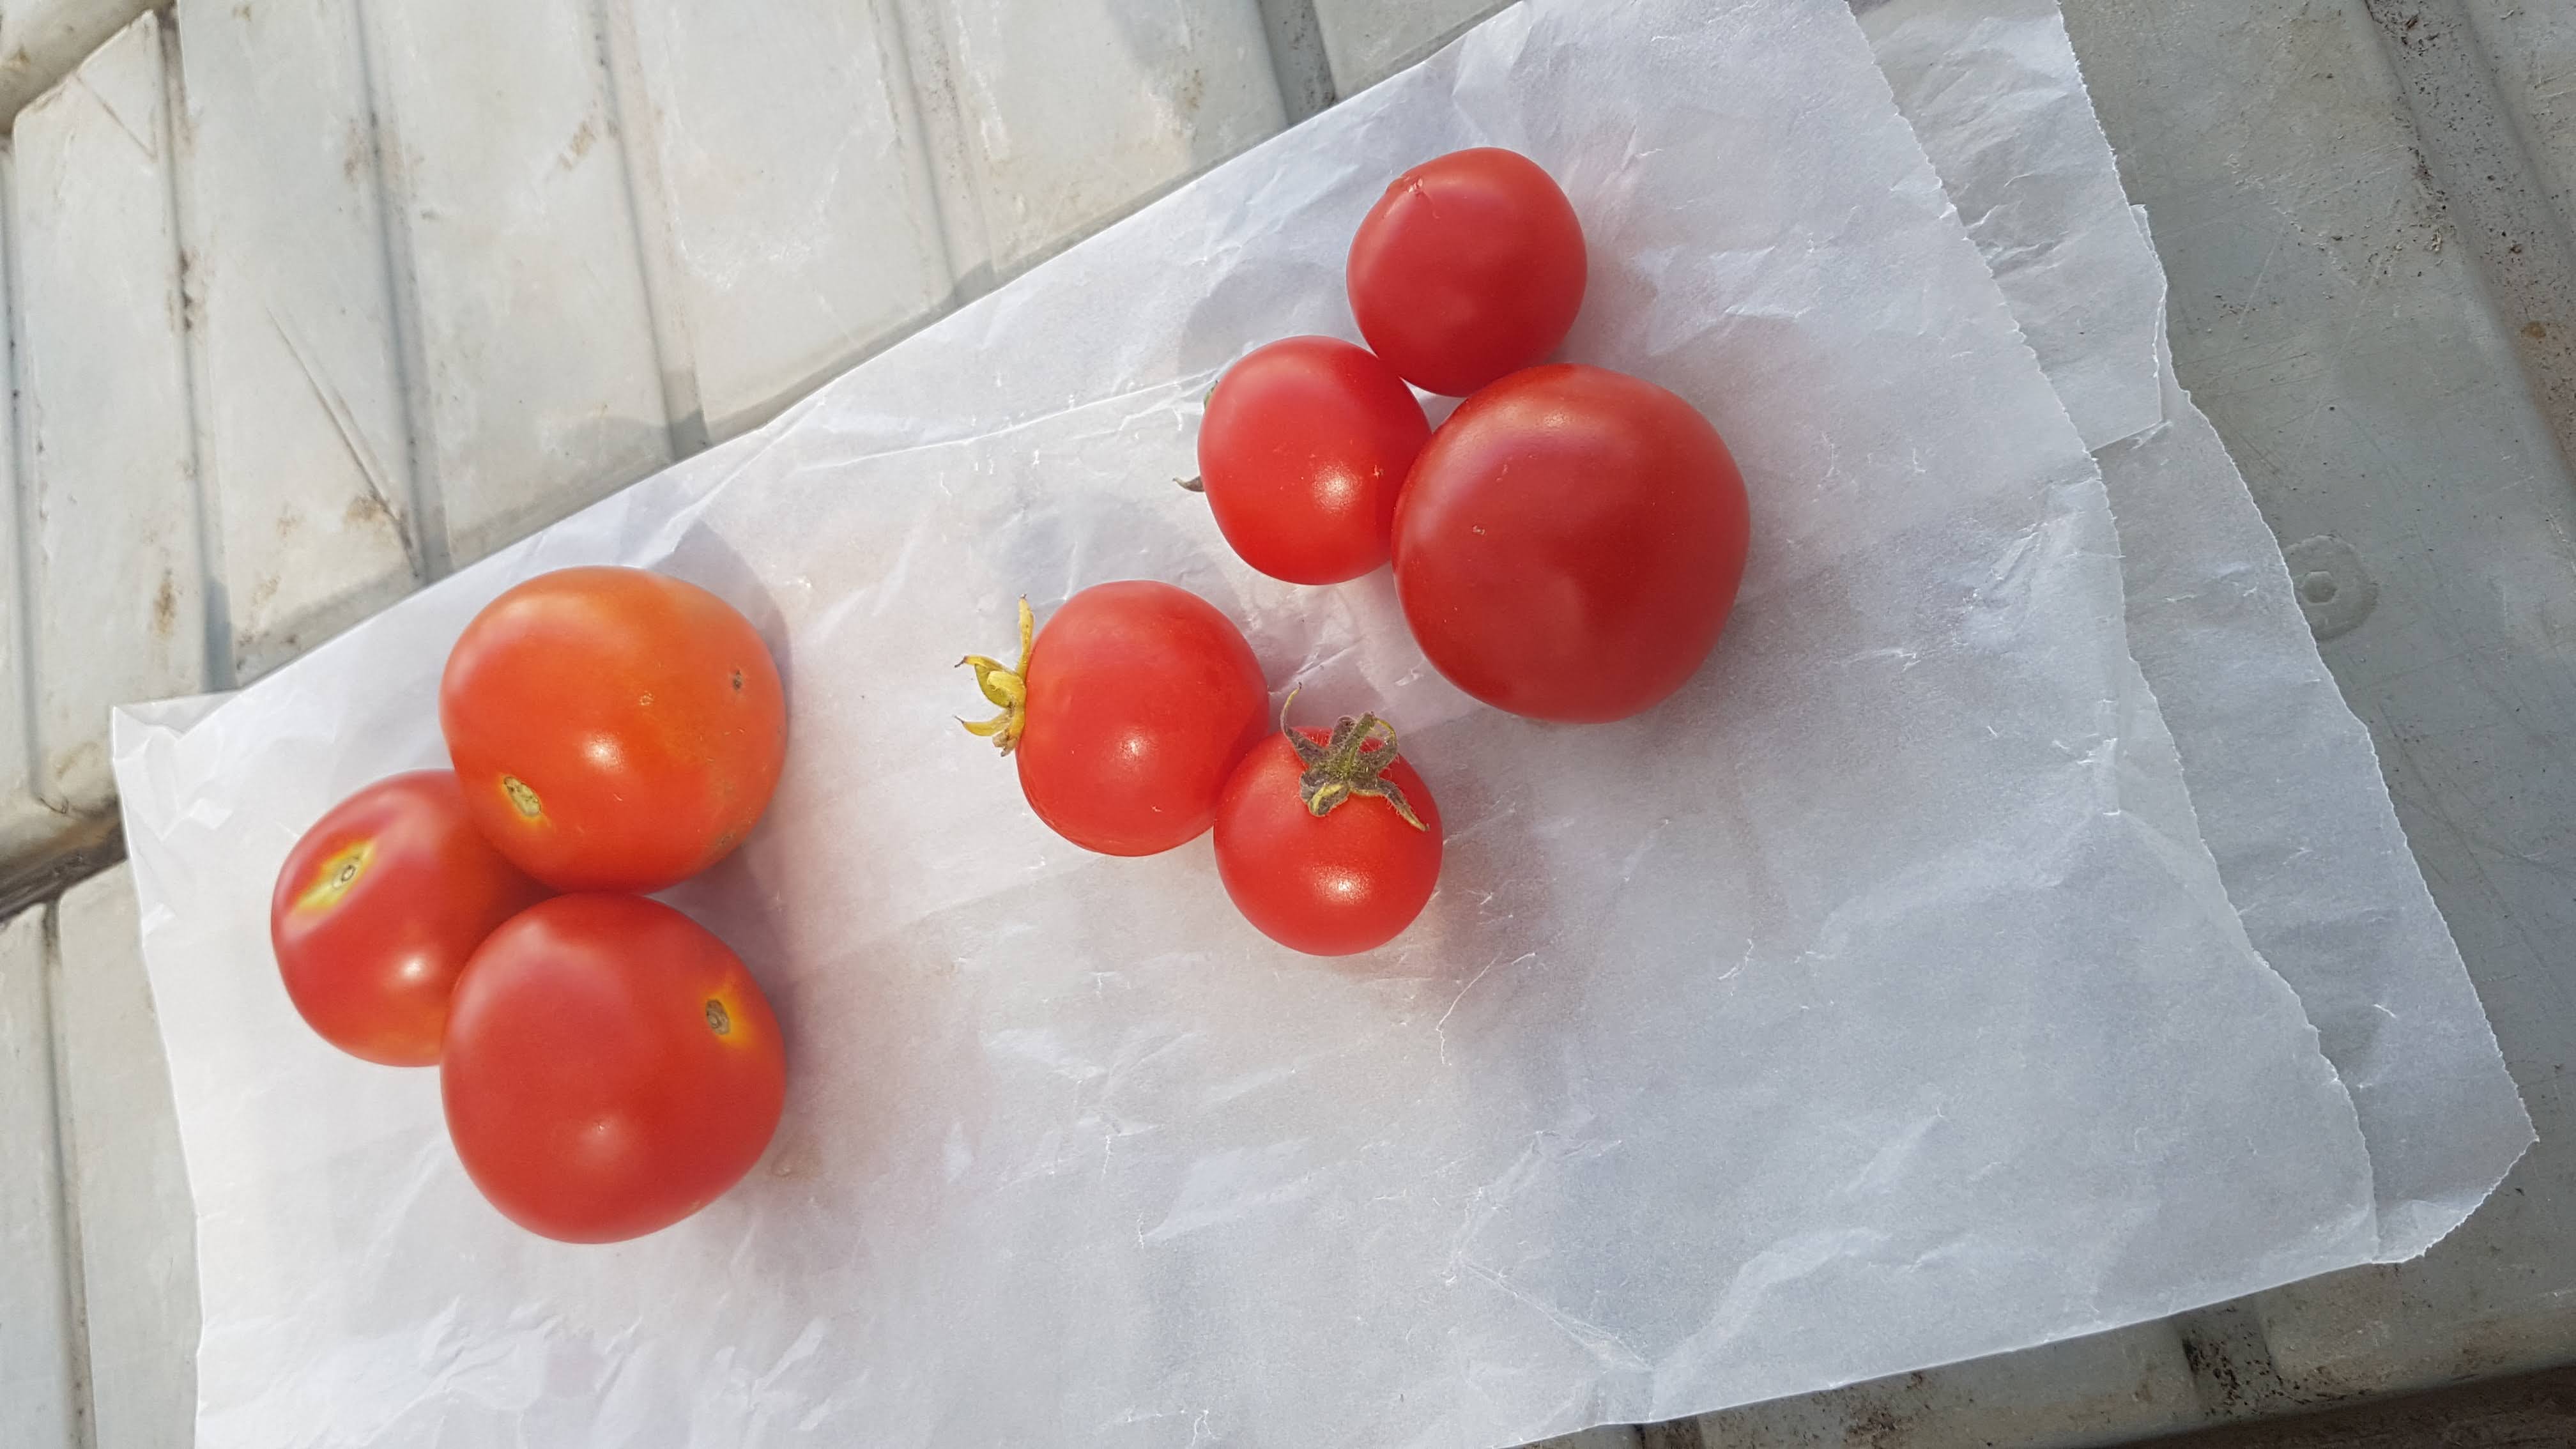 Two piles of tomatoes - tomatoes at the bottom of the picture are enriched with vitamin D, at the top are wild time tomatoes.